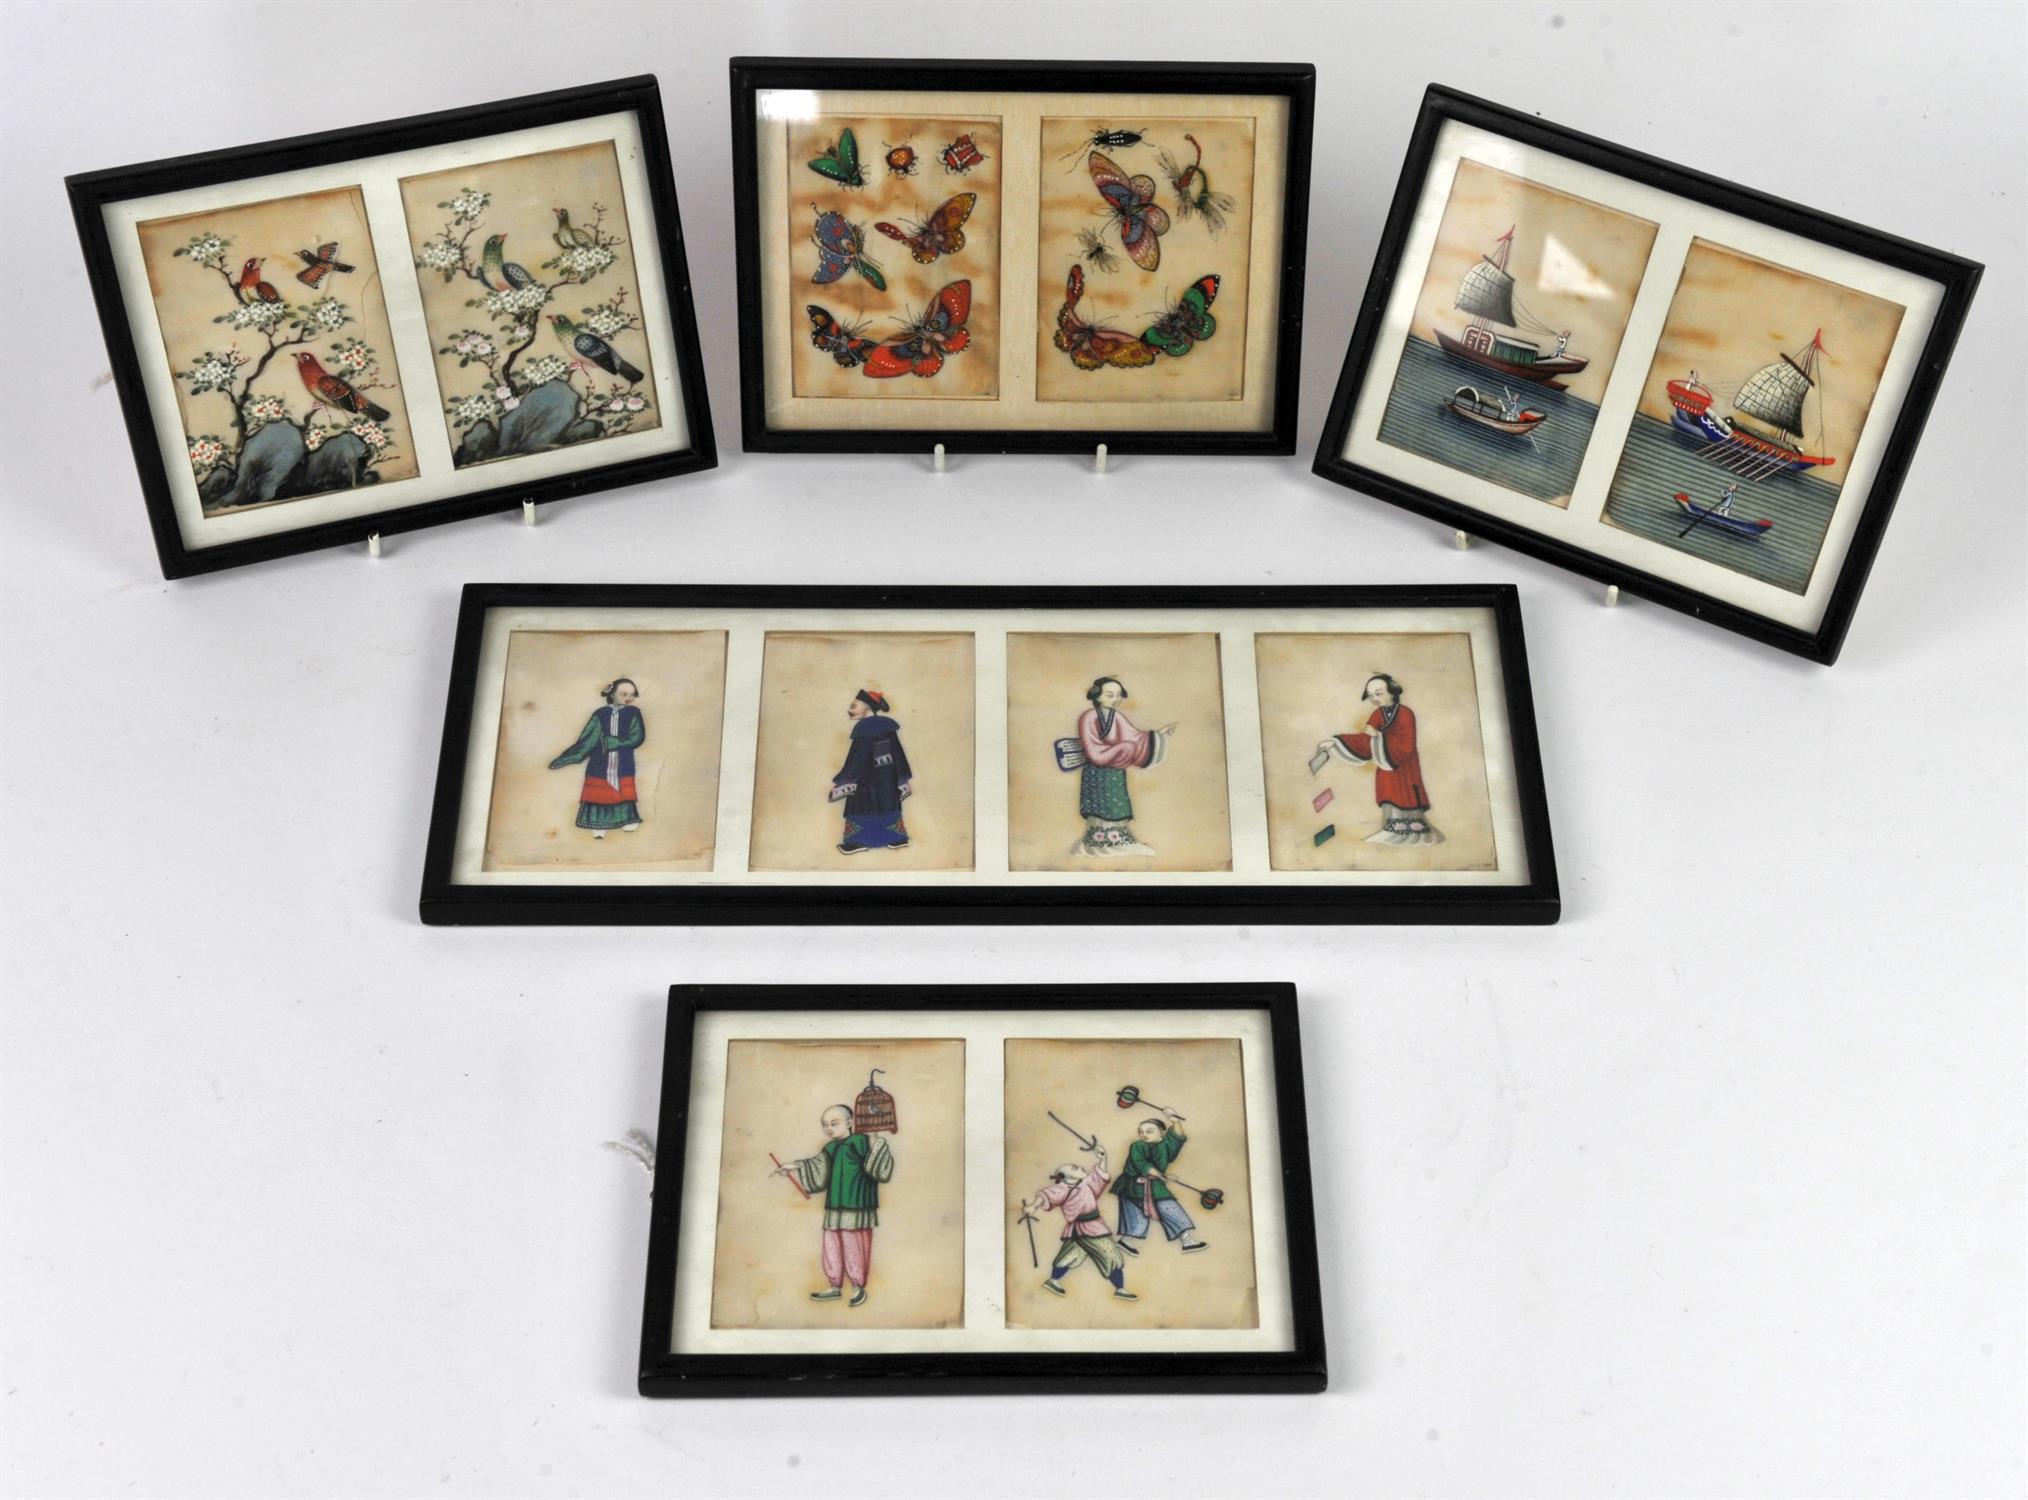 Twelve 19th century Chinese paintings on rice paper in five frames, depicting figures at various